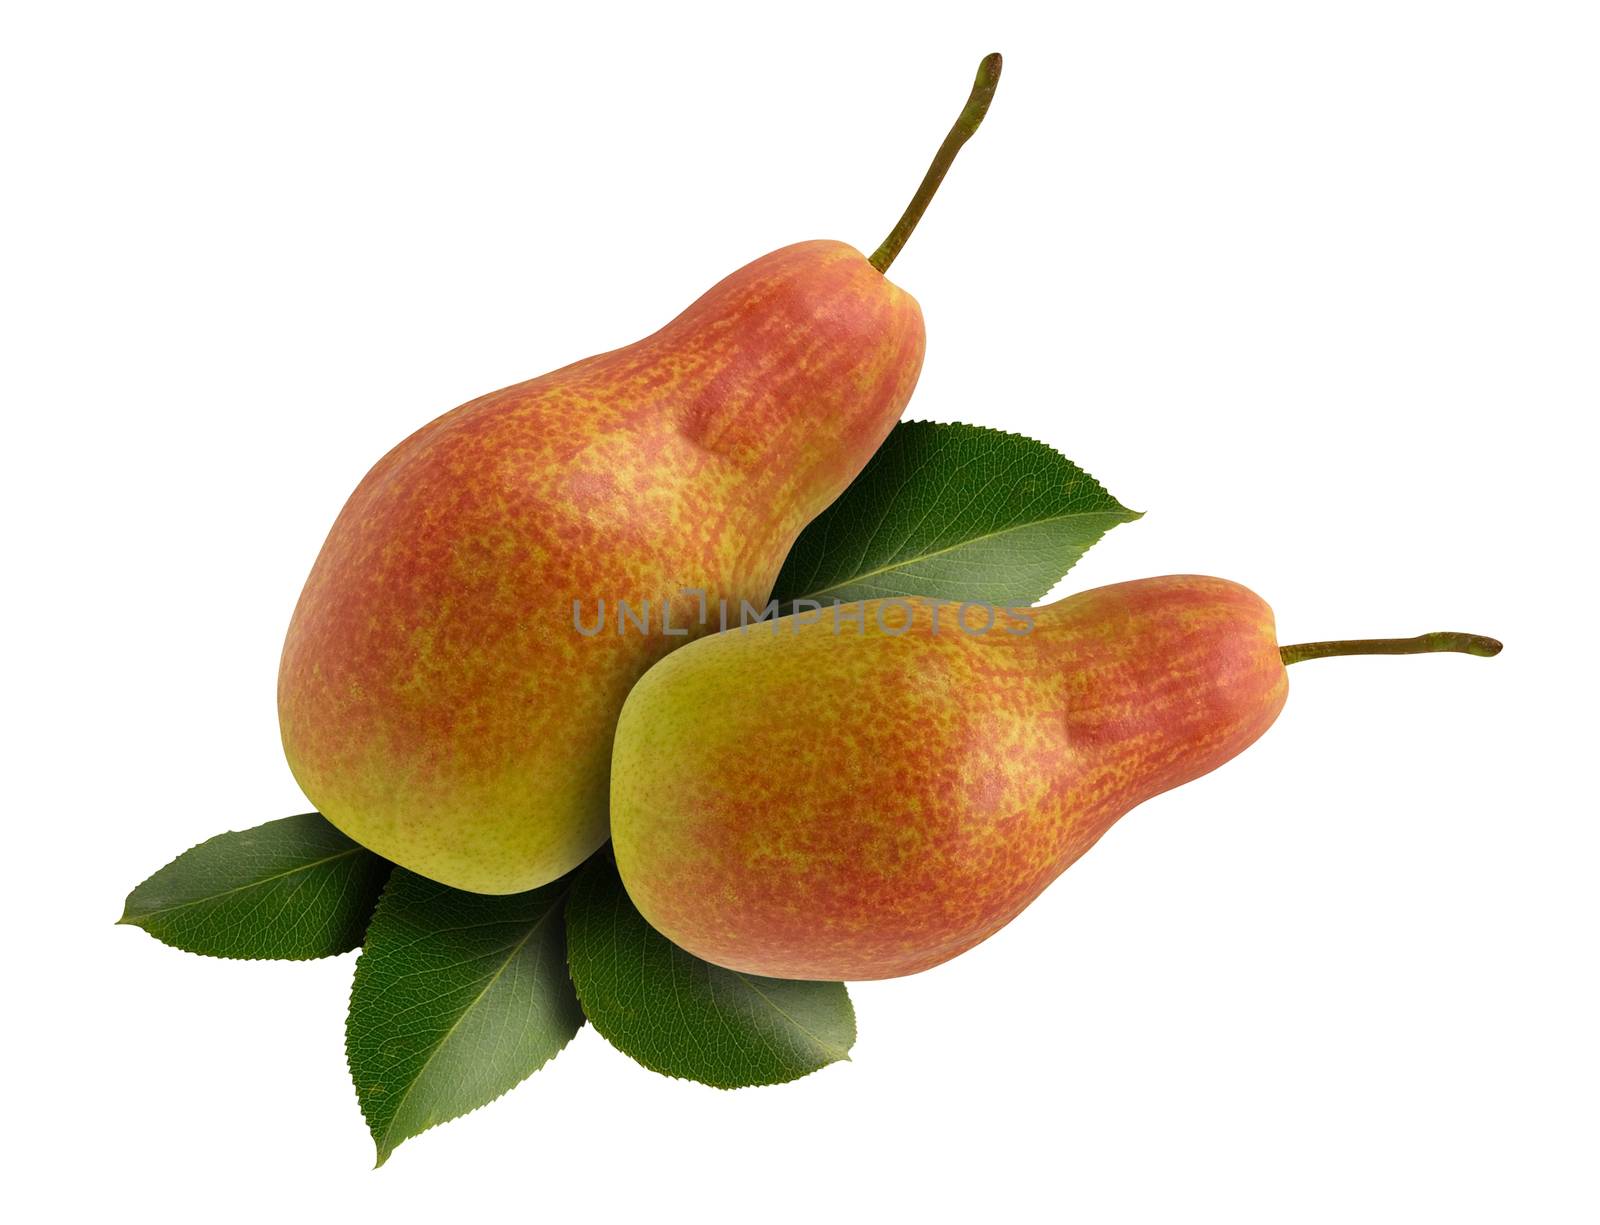 Juicy pears isolated over white background.